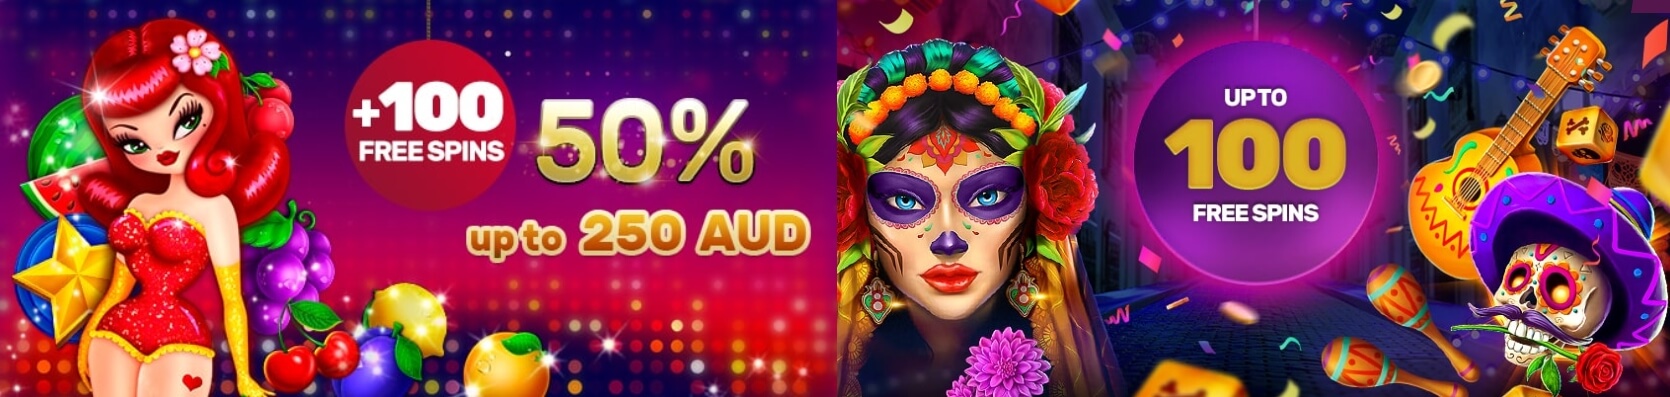 Reload and Free Spins Bonuses PlayAmo